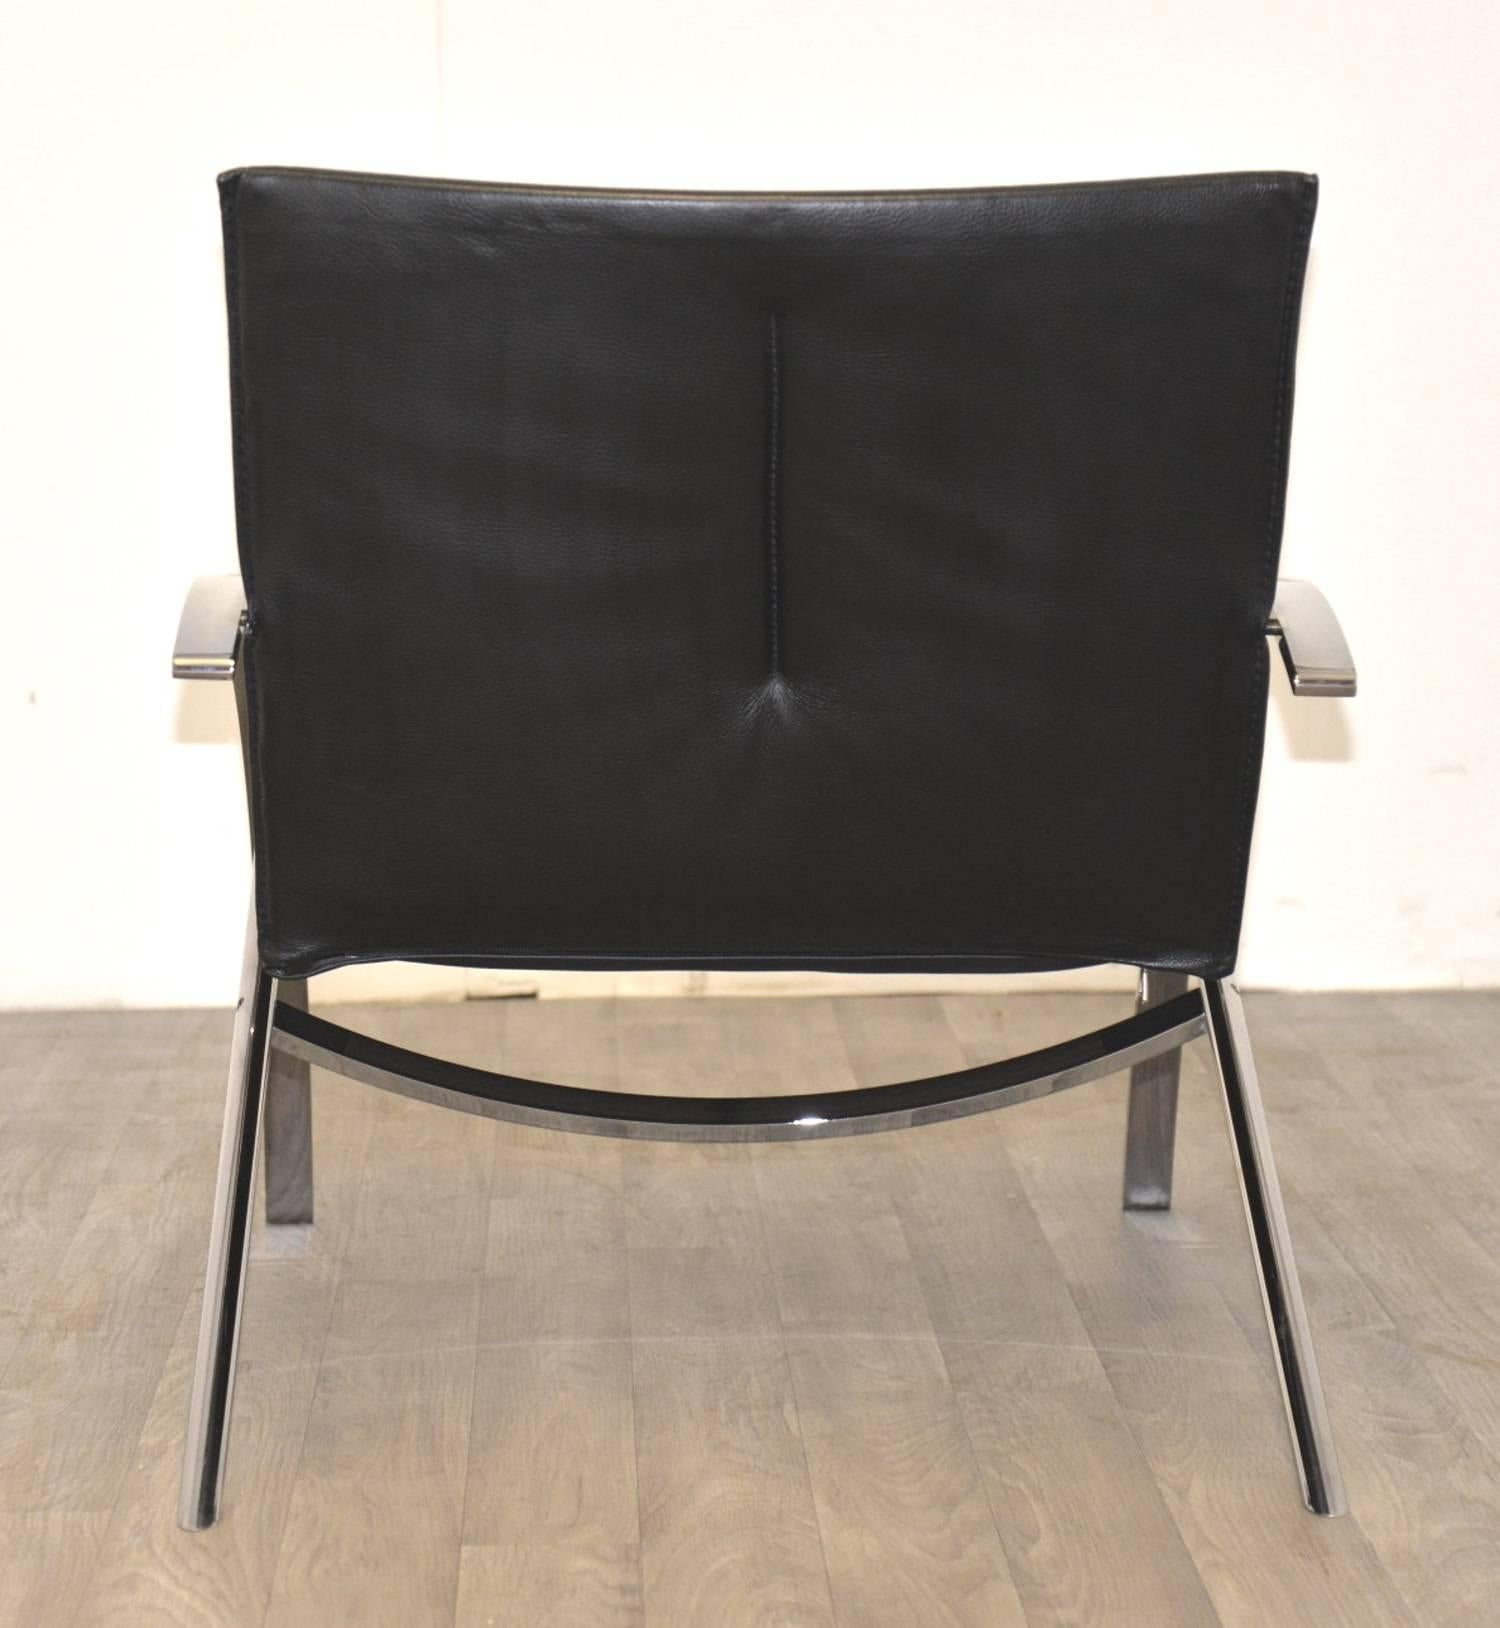 Leather Paul Tuttle Arco Lounge Chairs for Strässle of Switzerland, 1970s For Sale